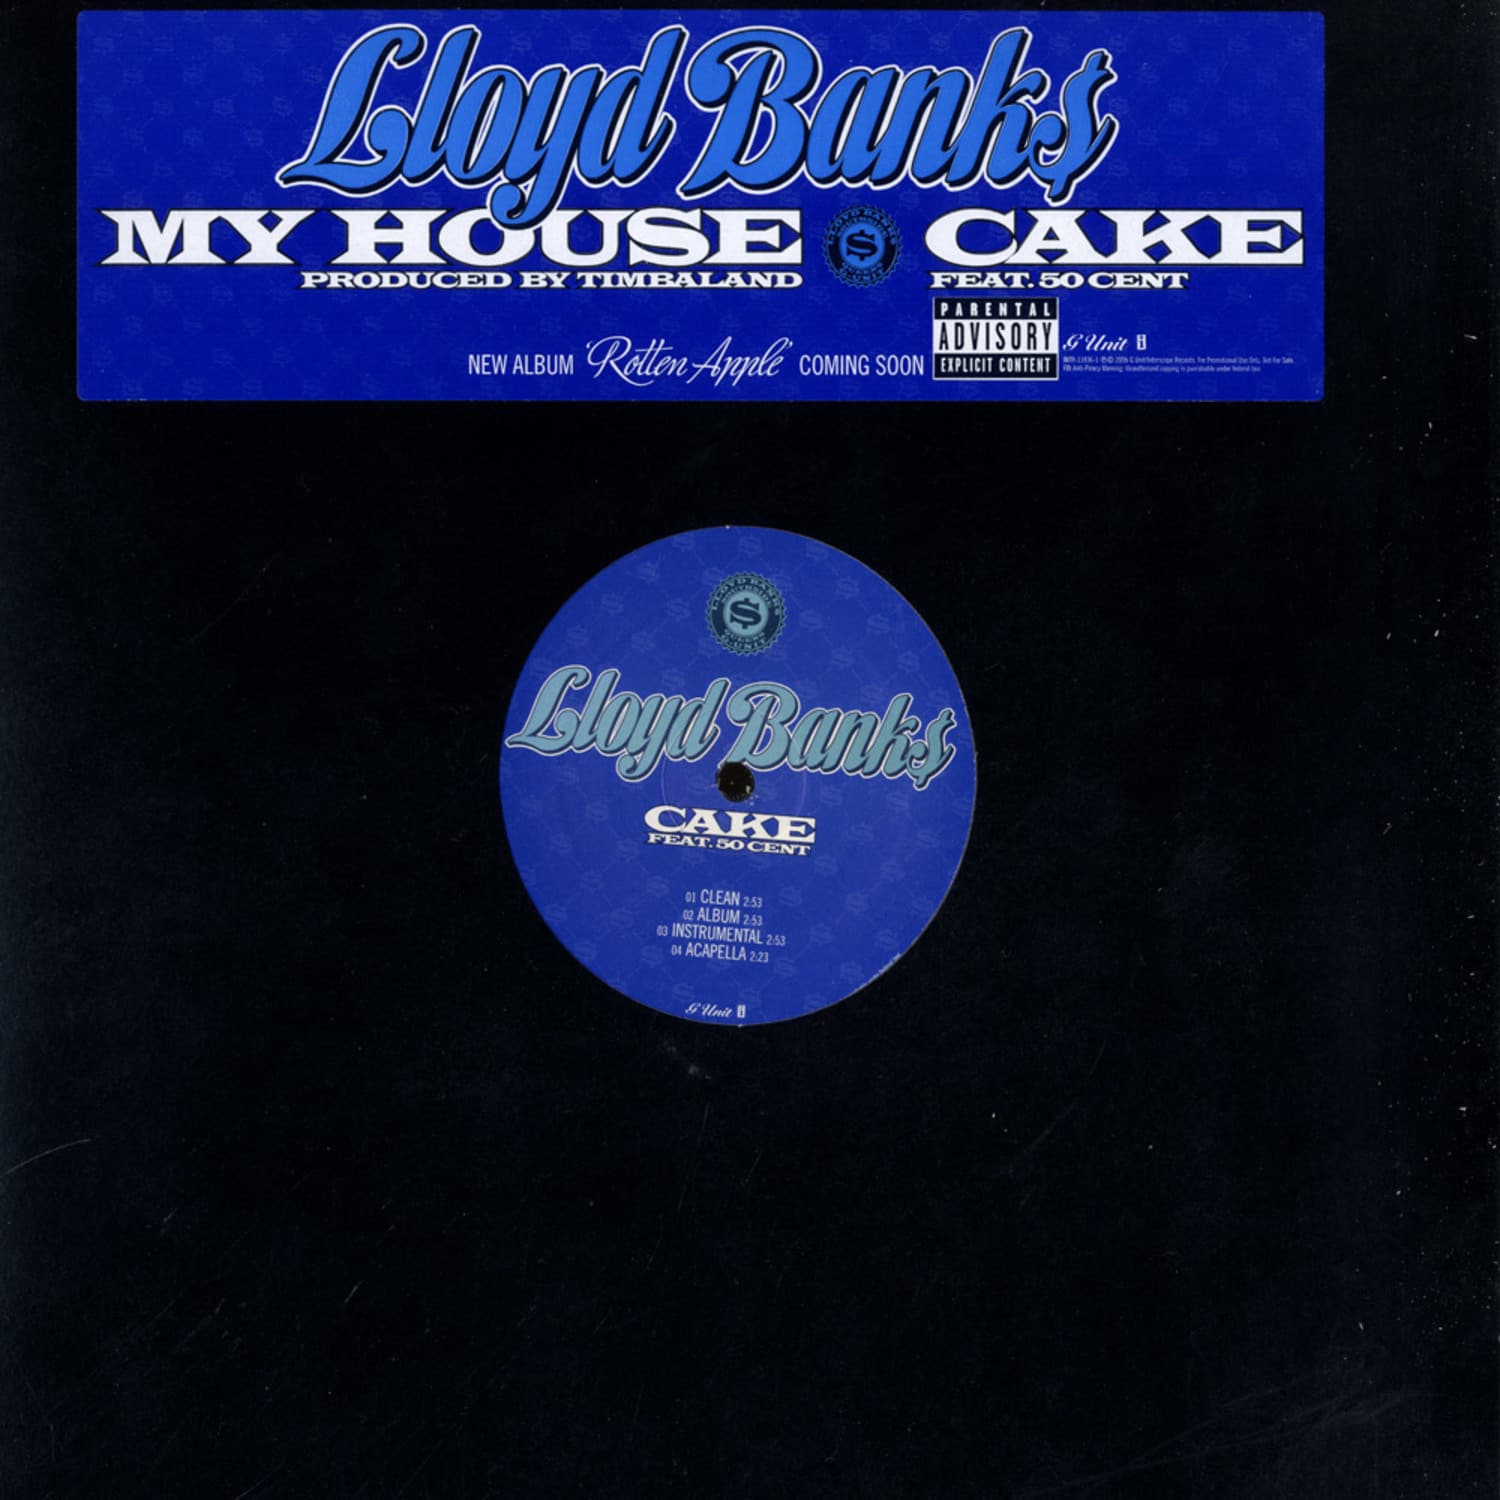 Lloyd Banks feat 50 Cent - CAKE / MY HOUSE